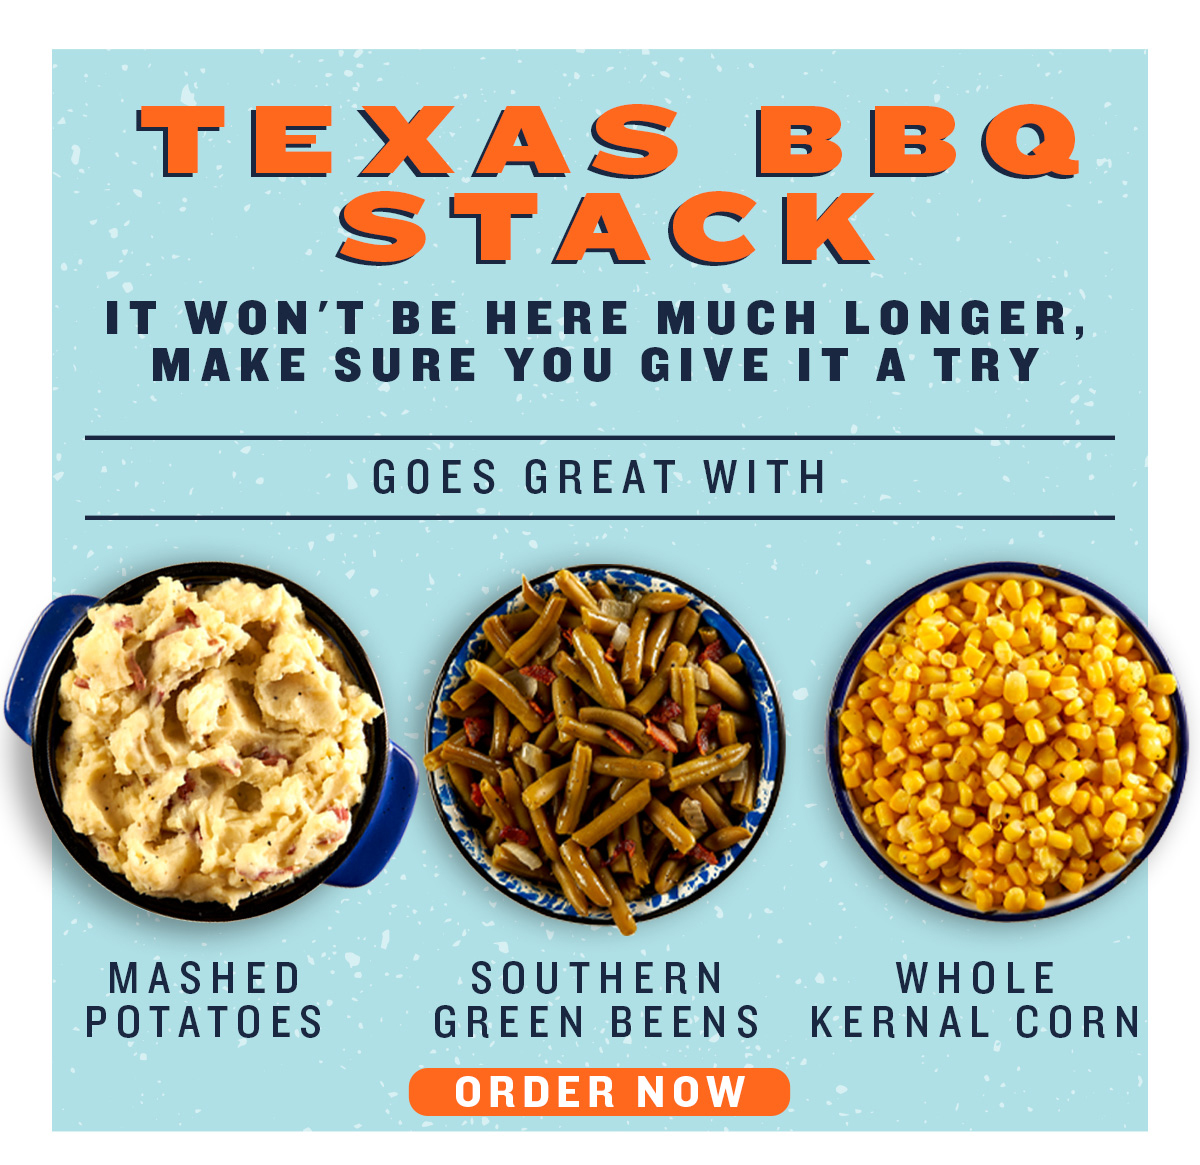 Texas BBQ stack